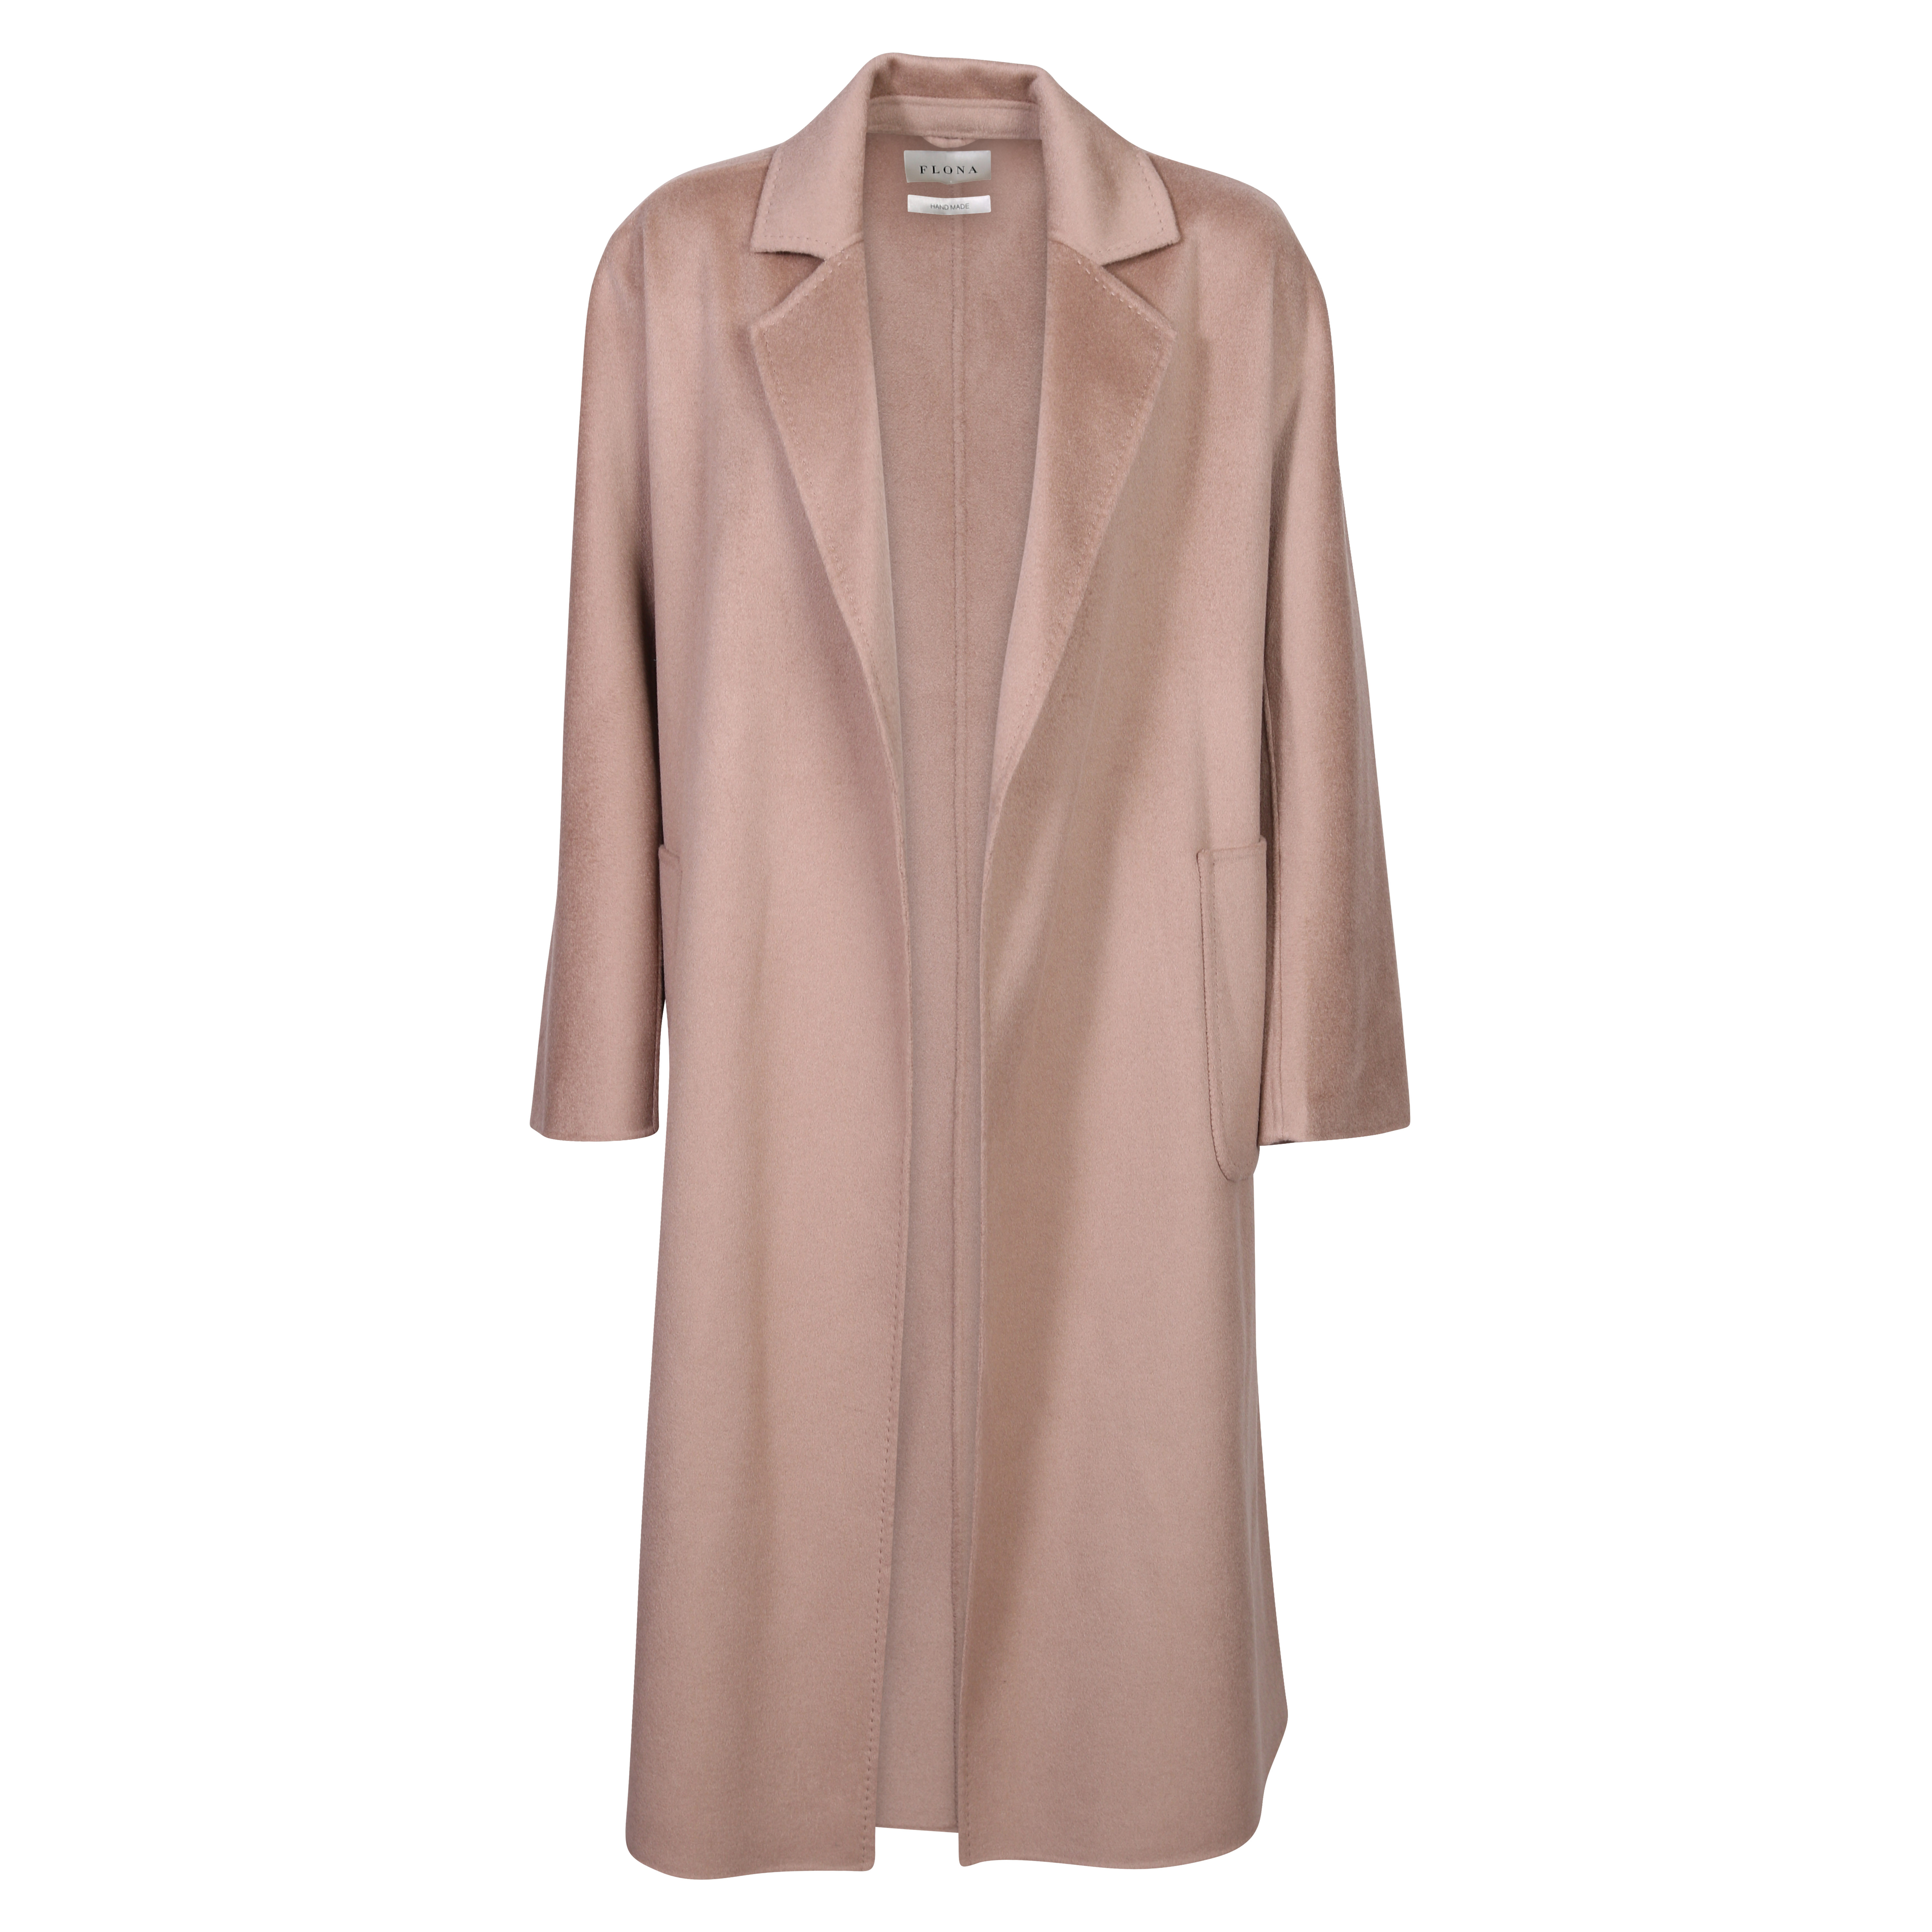 Flona Wool/Cashmere Coat in Taupe XS/S